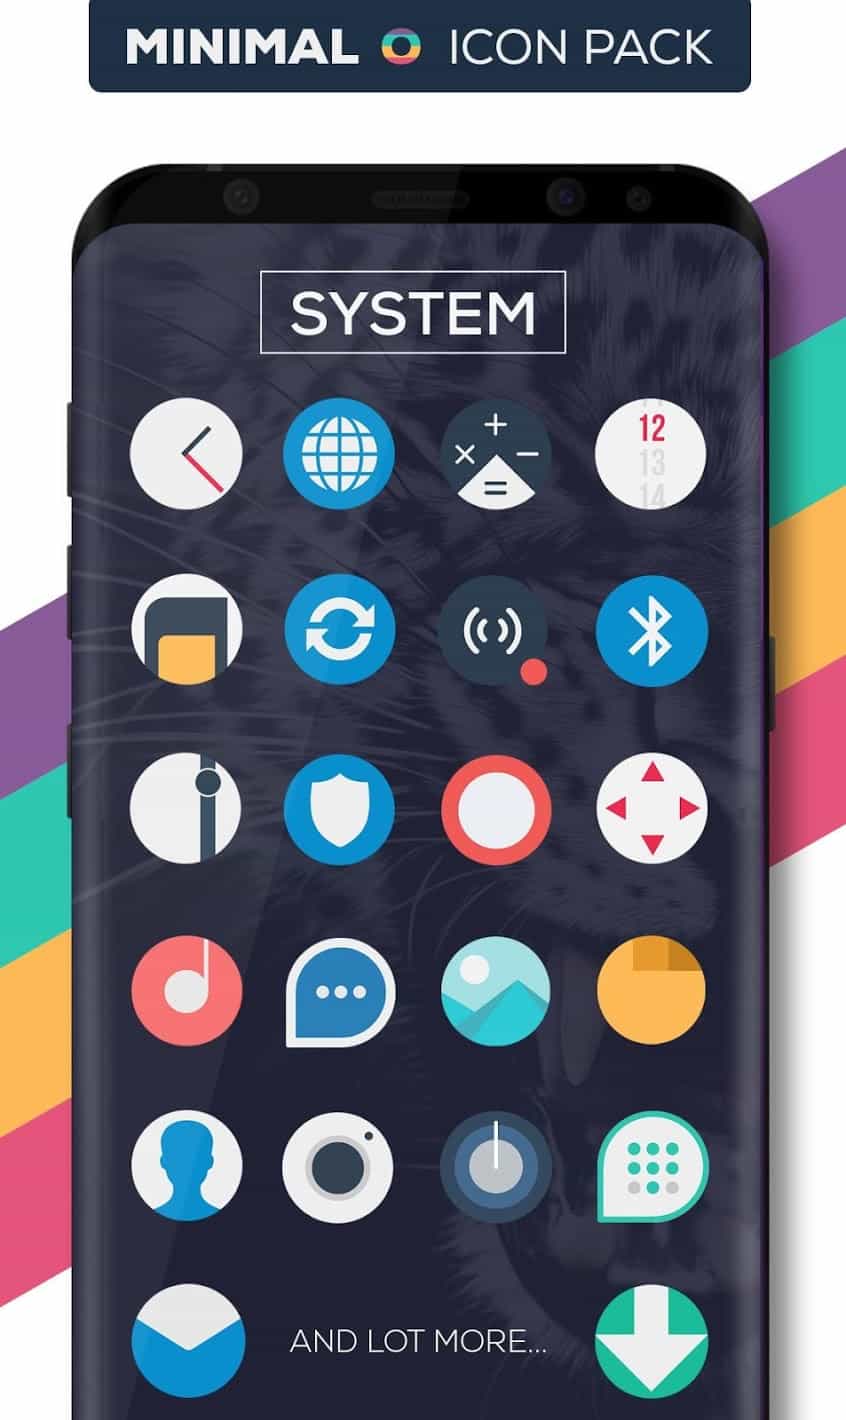 I-Minimal O Icon Pack Patched APK